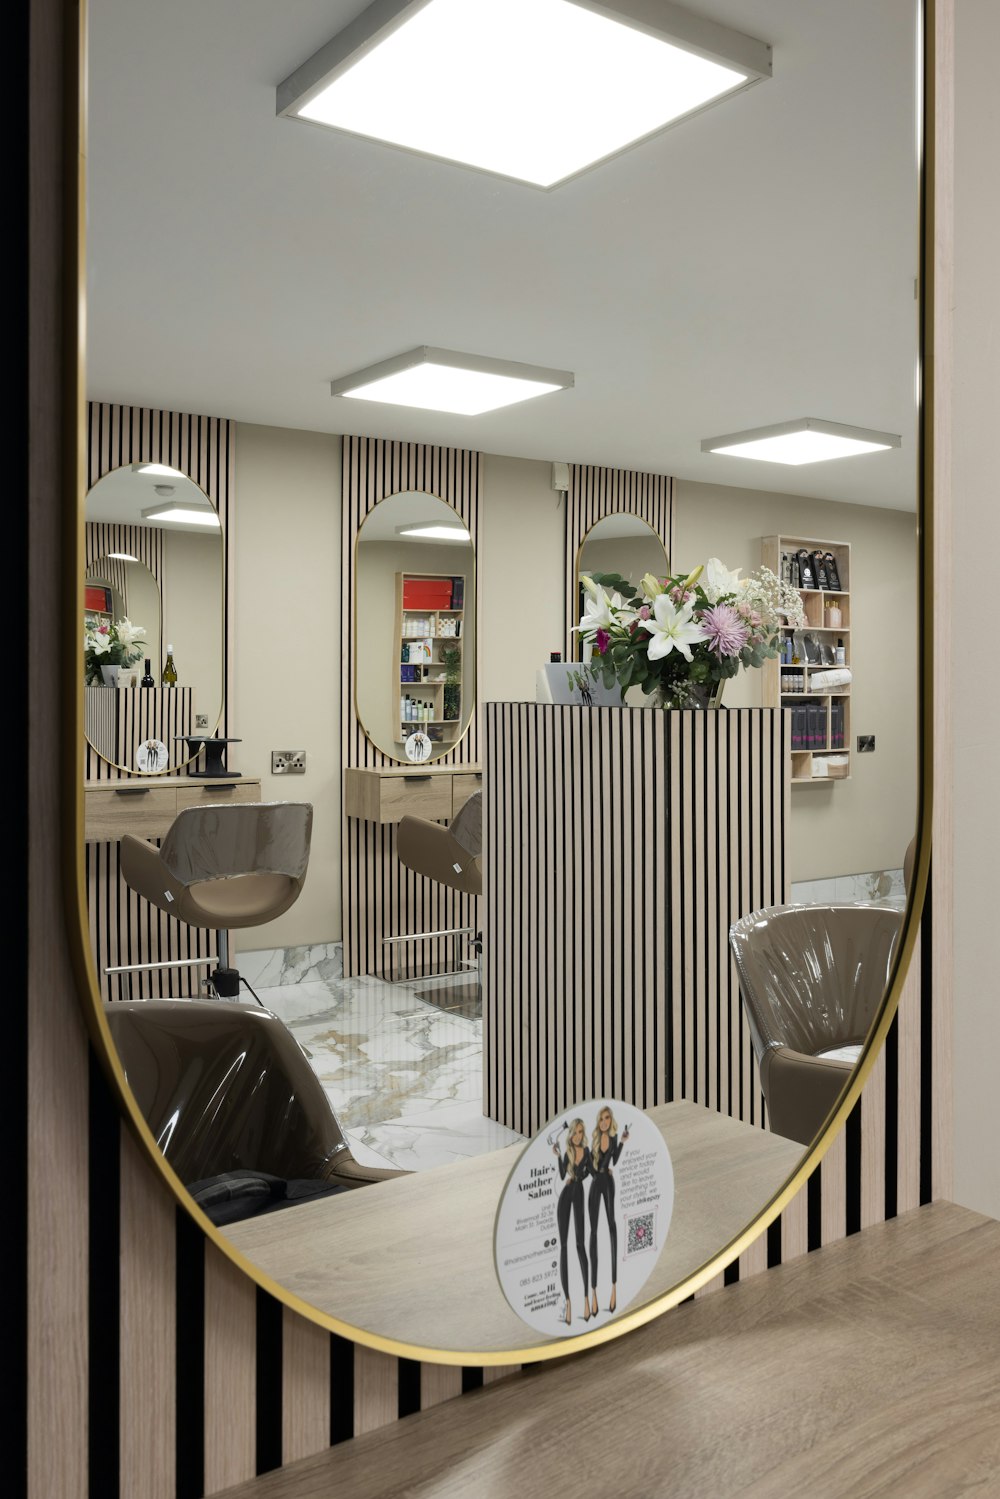 a mirror reflecting a hair salon with chairs